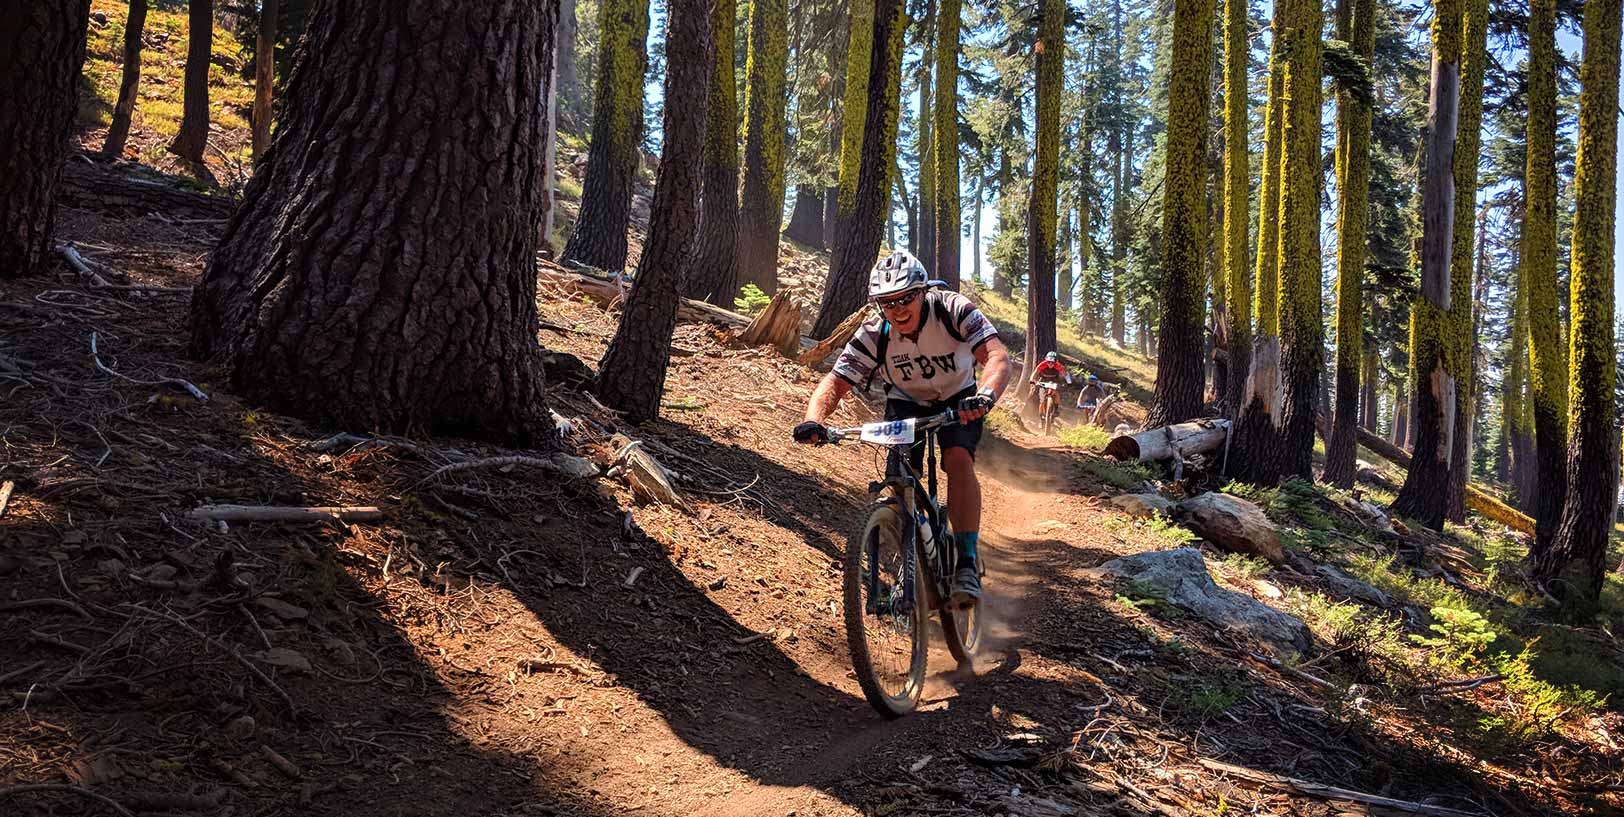 Racers riding through big pine tree trunks with green moss on them